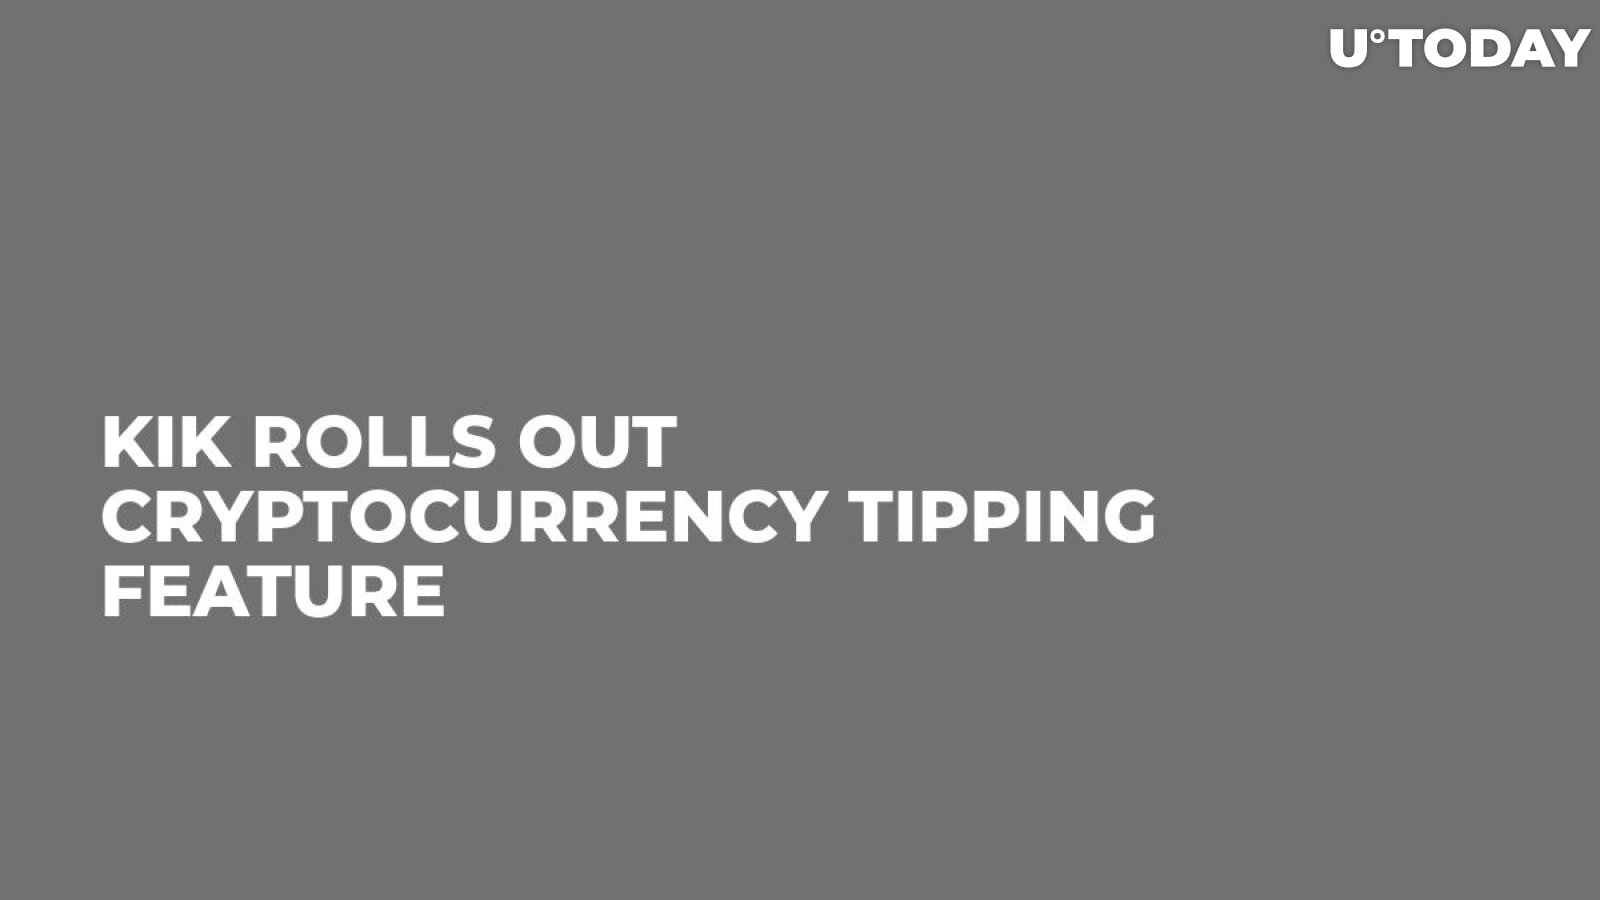 Kik Rolls Out Cryptocurrency Tipping Feature 